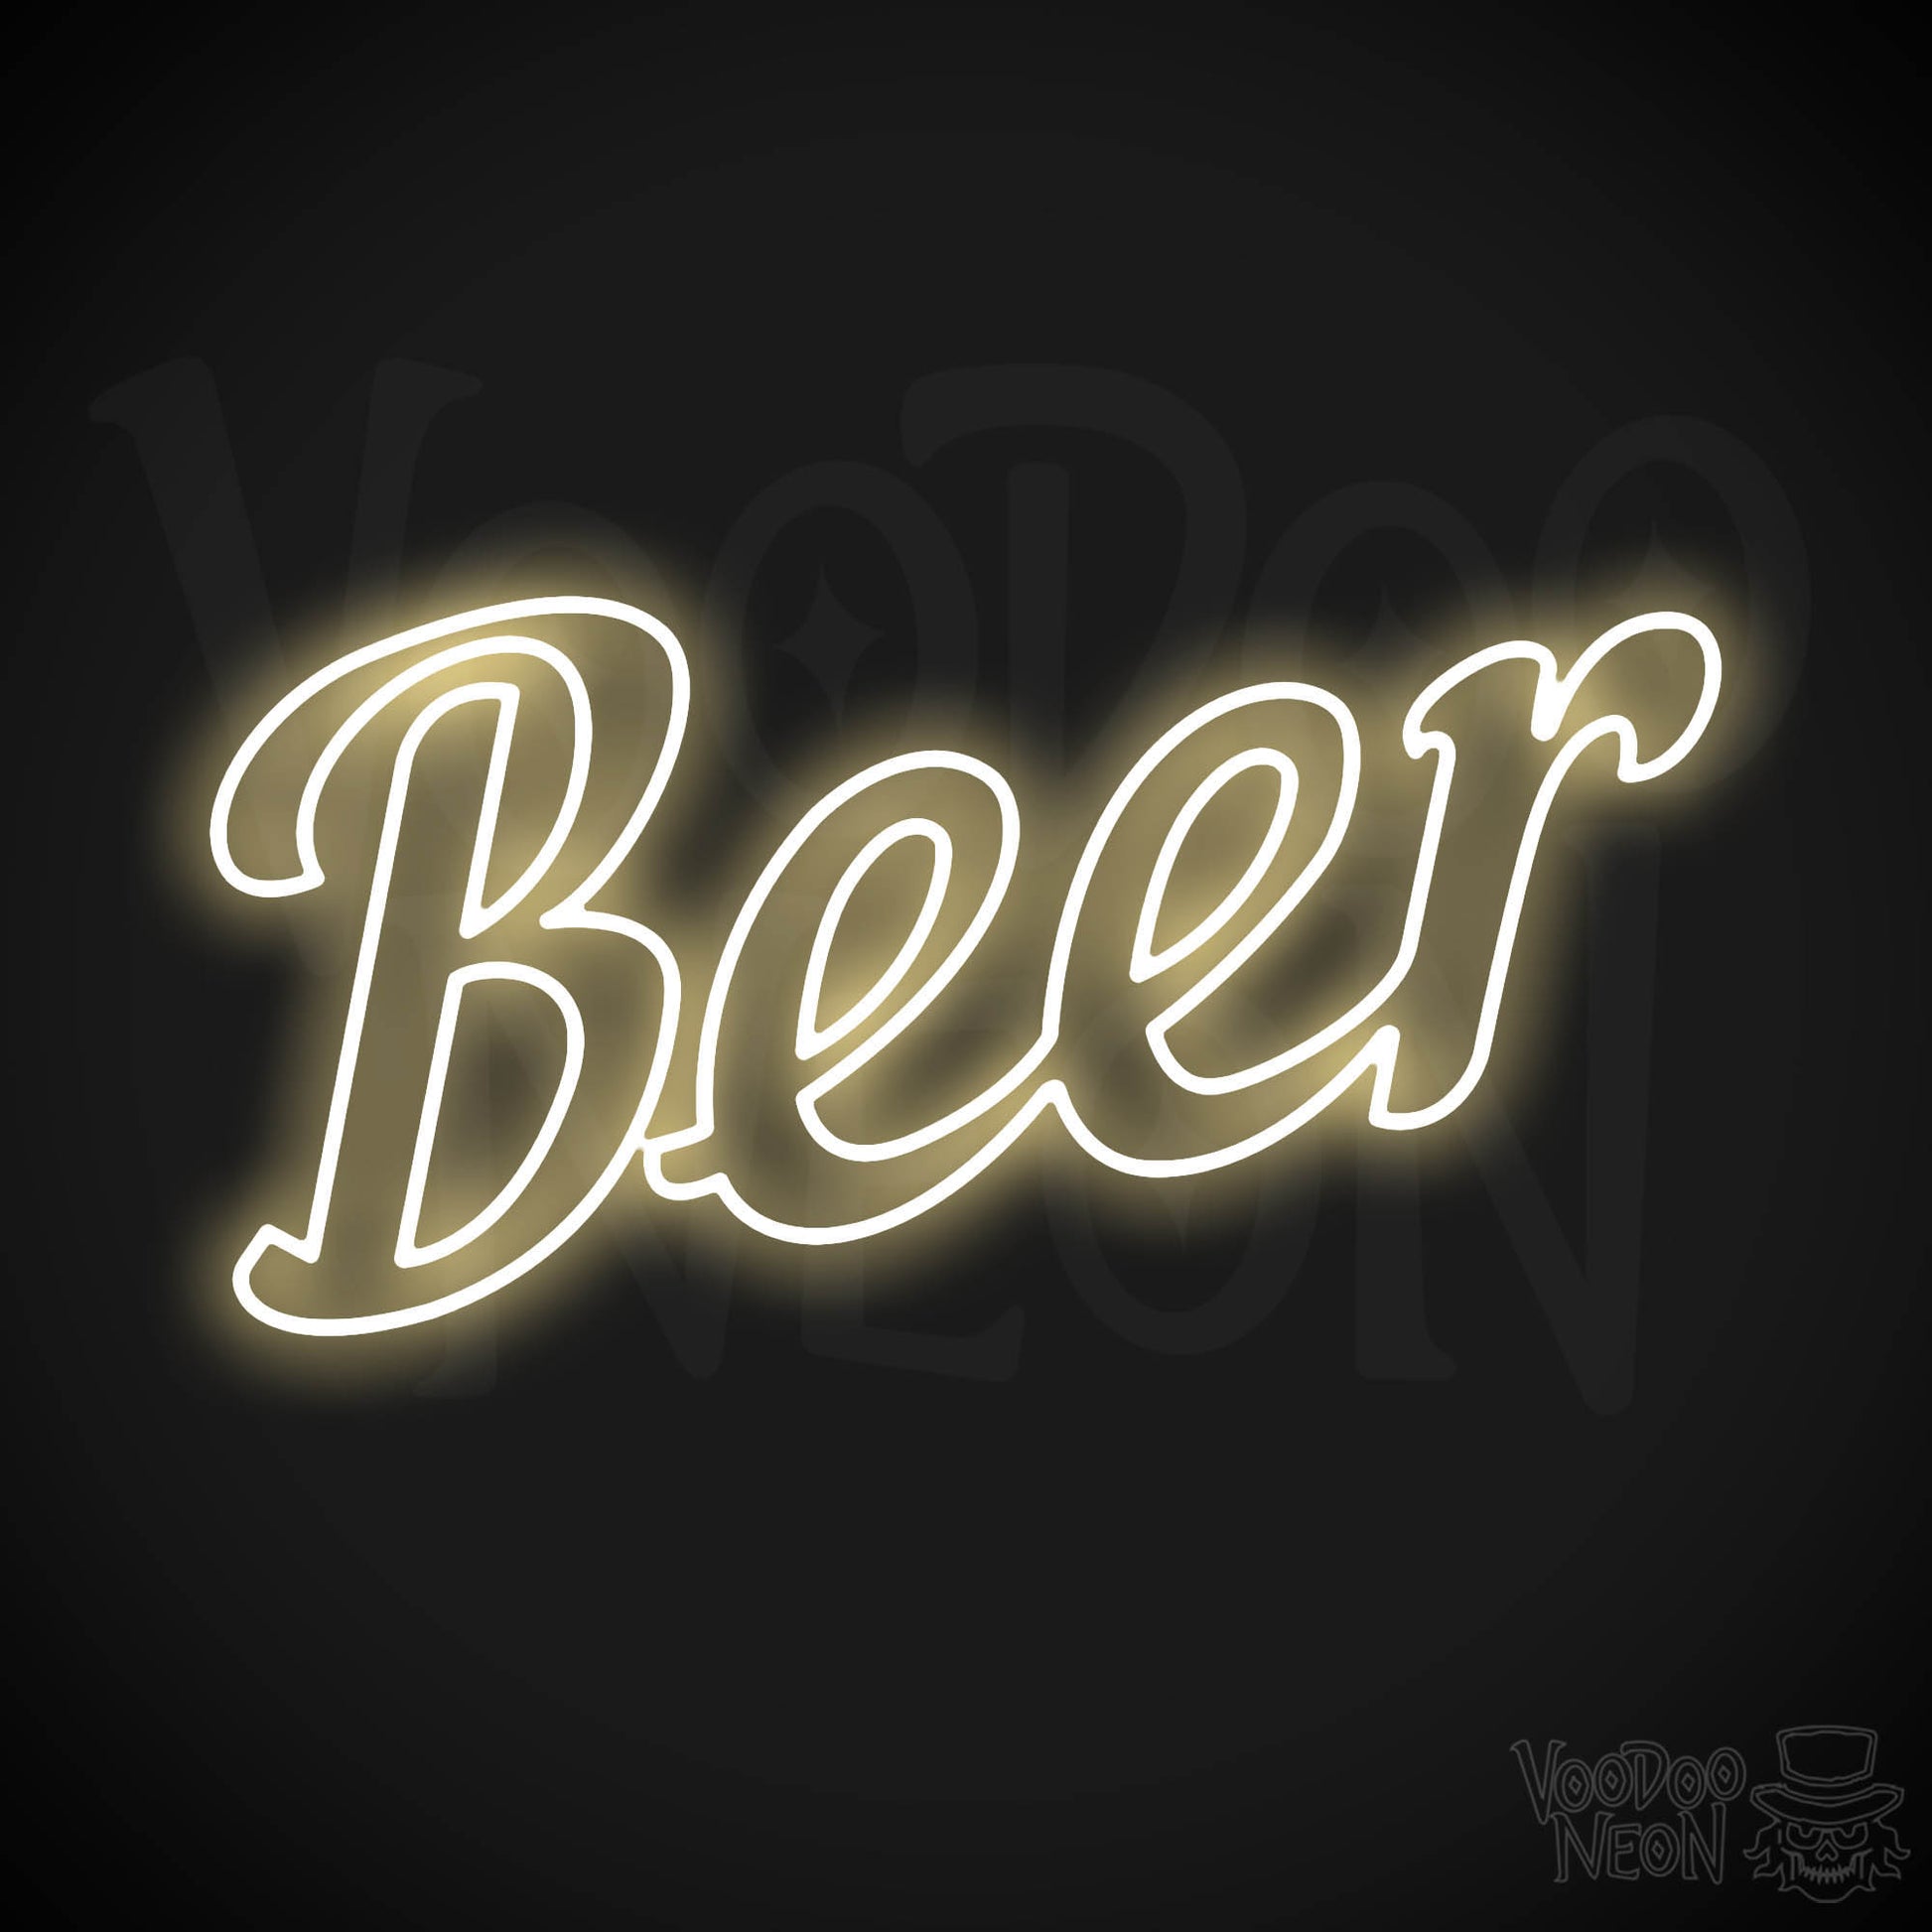 Beer LED Neon - Warm White